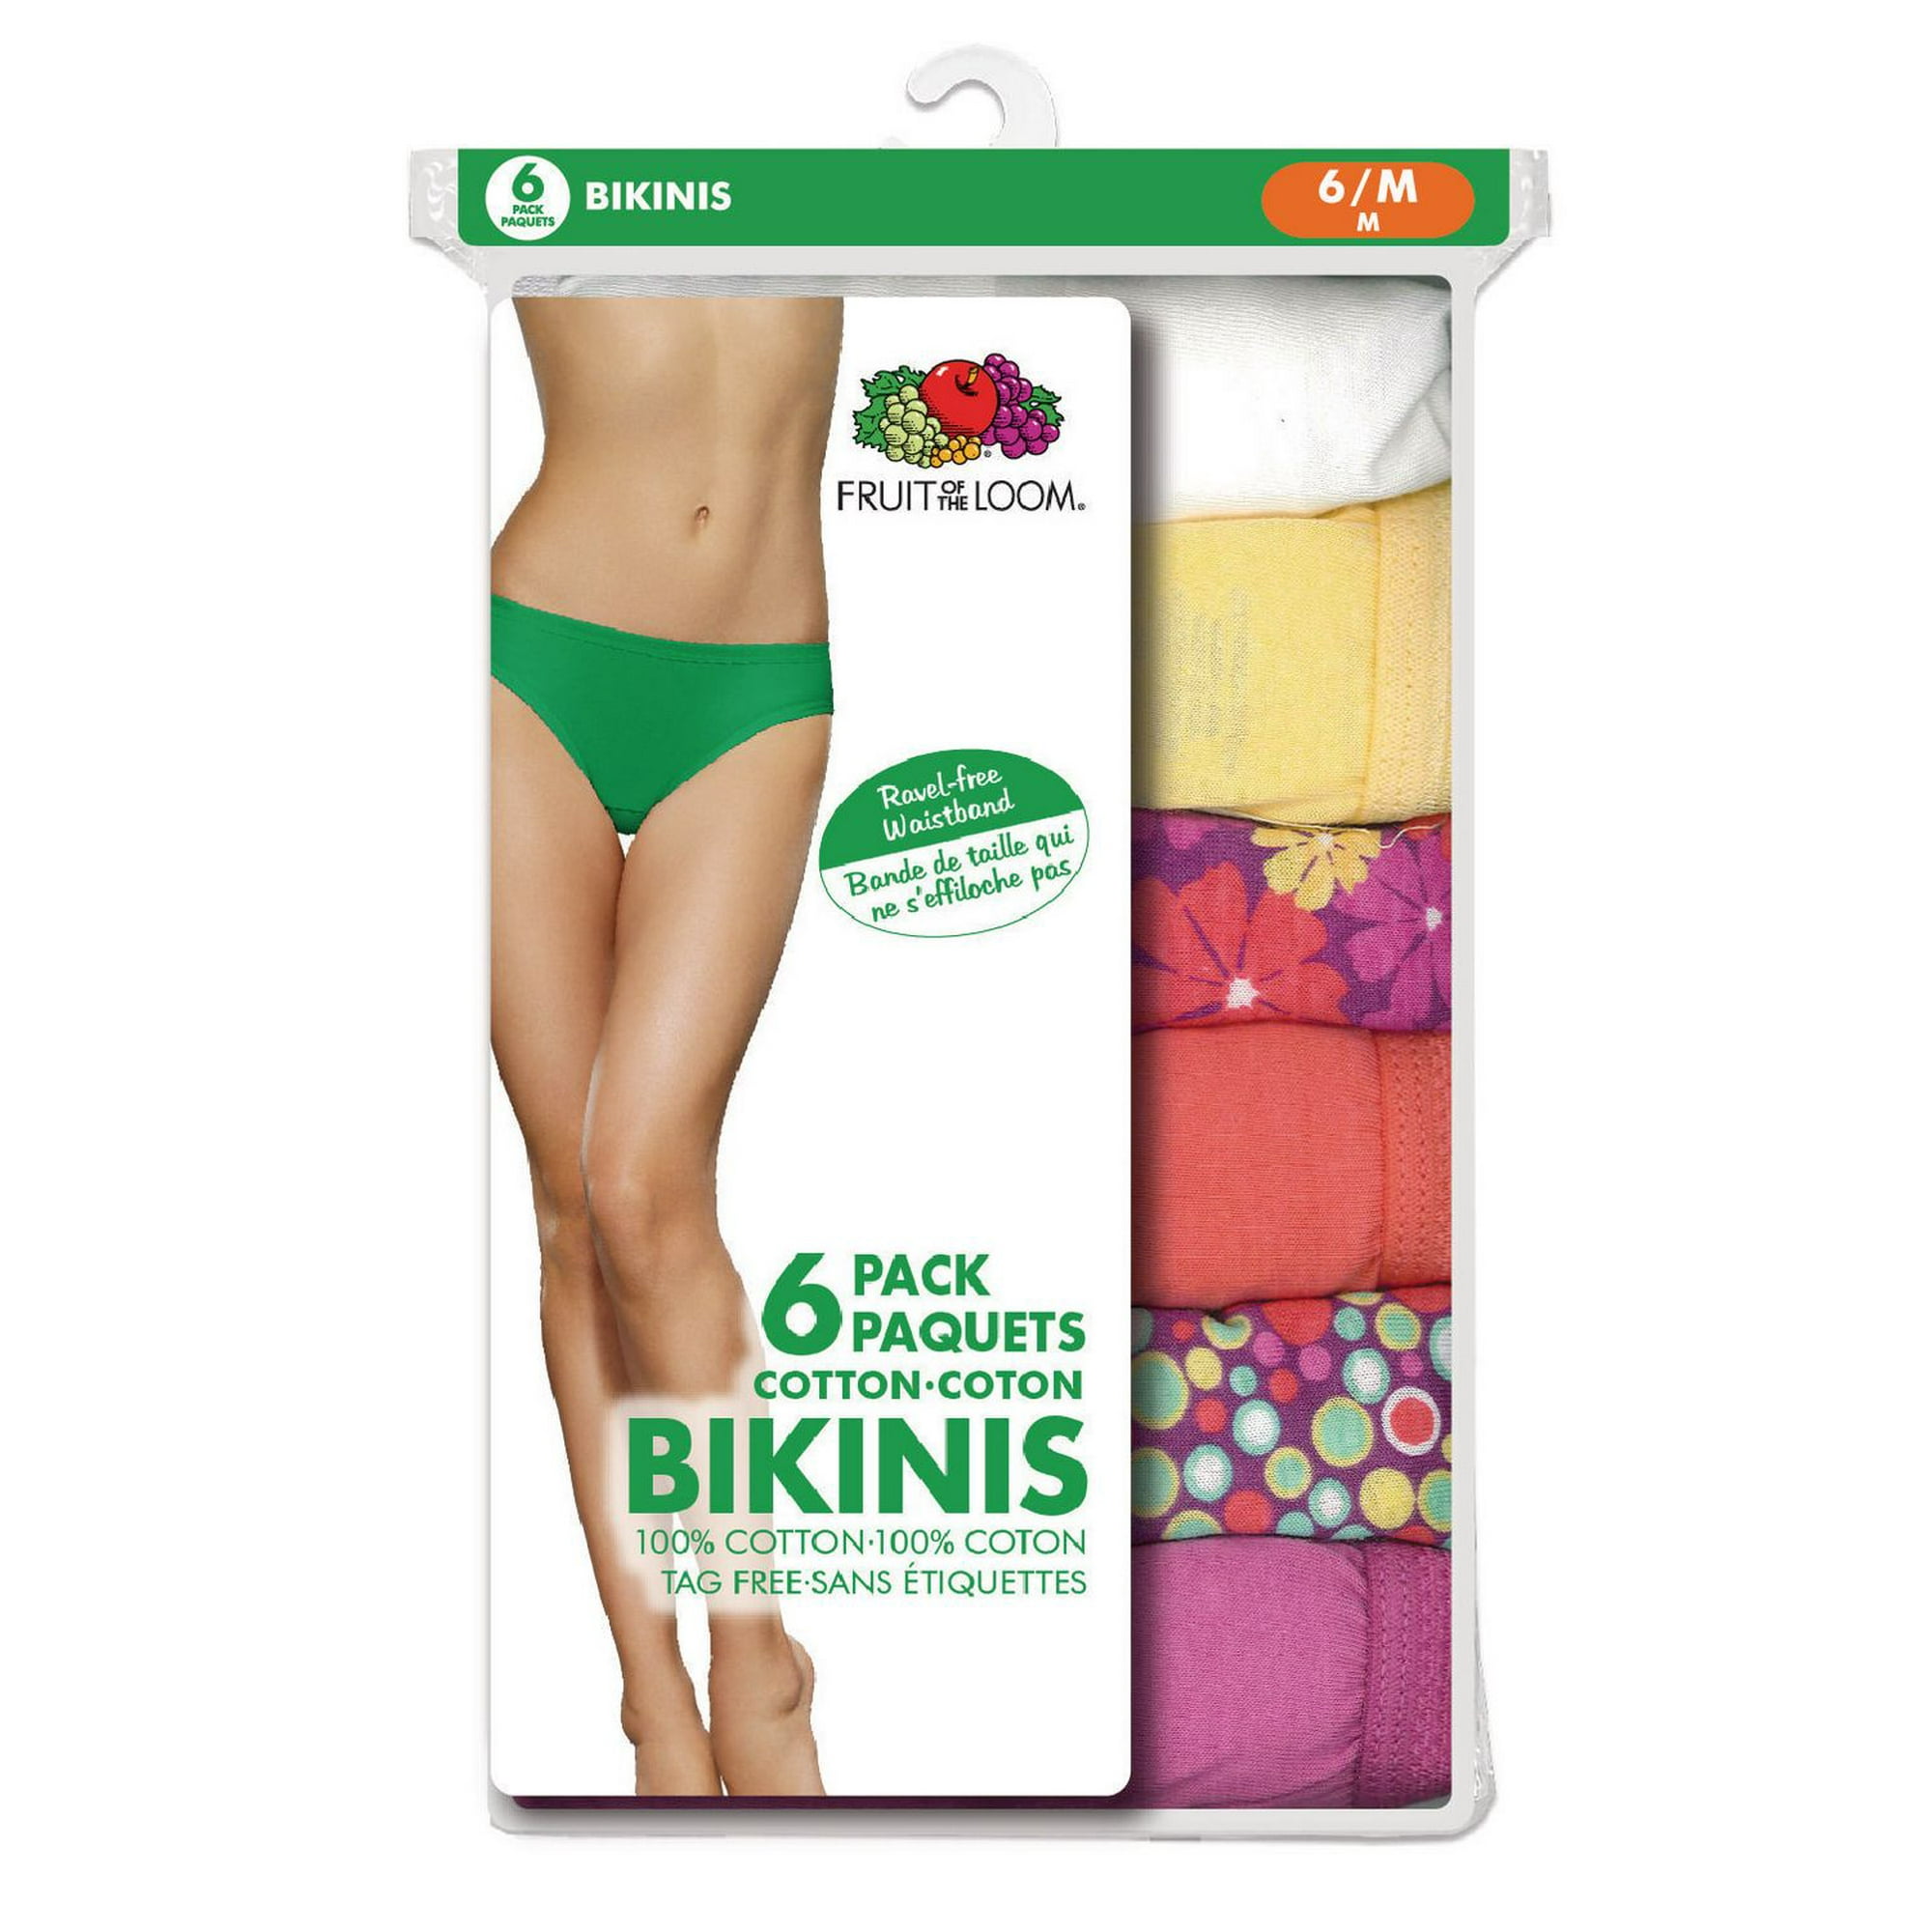 Bikini Cotton Ladies Panty Underwear Set at Rs 60/pack in New